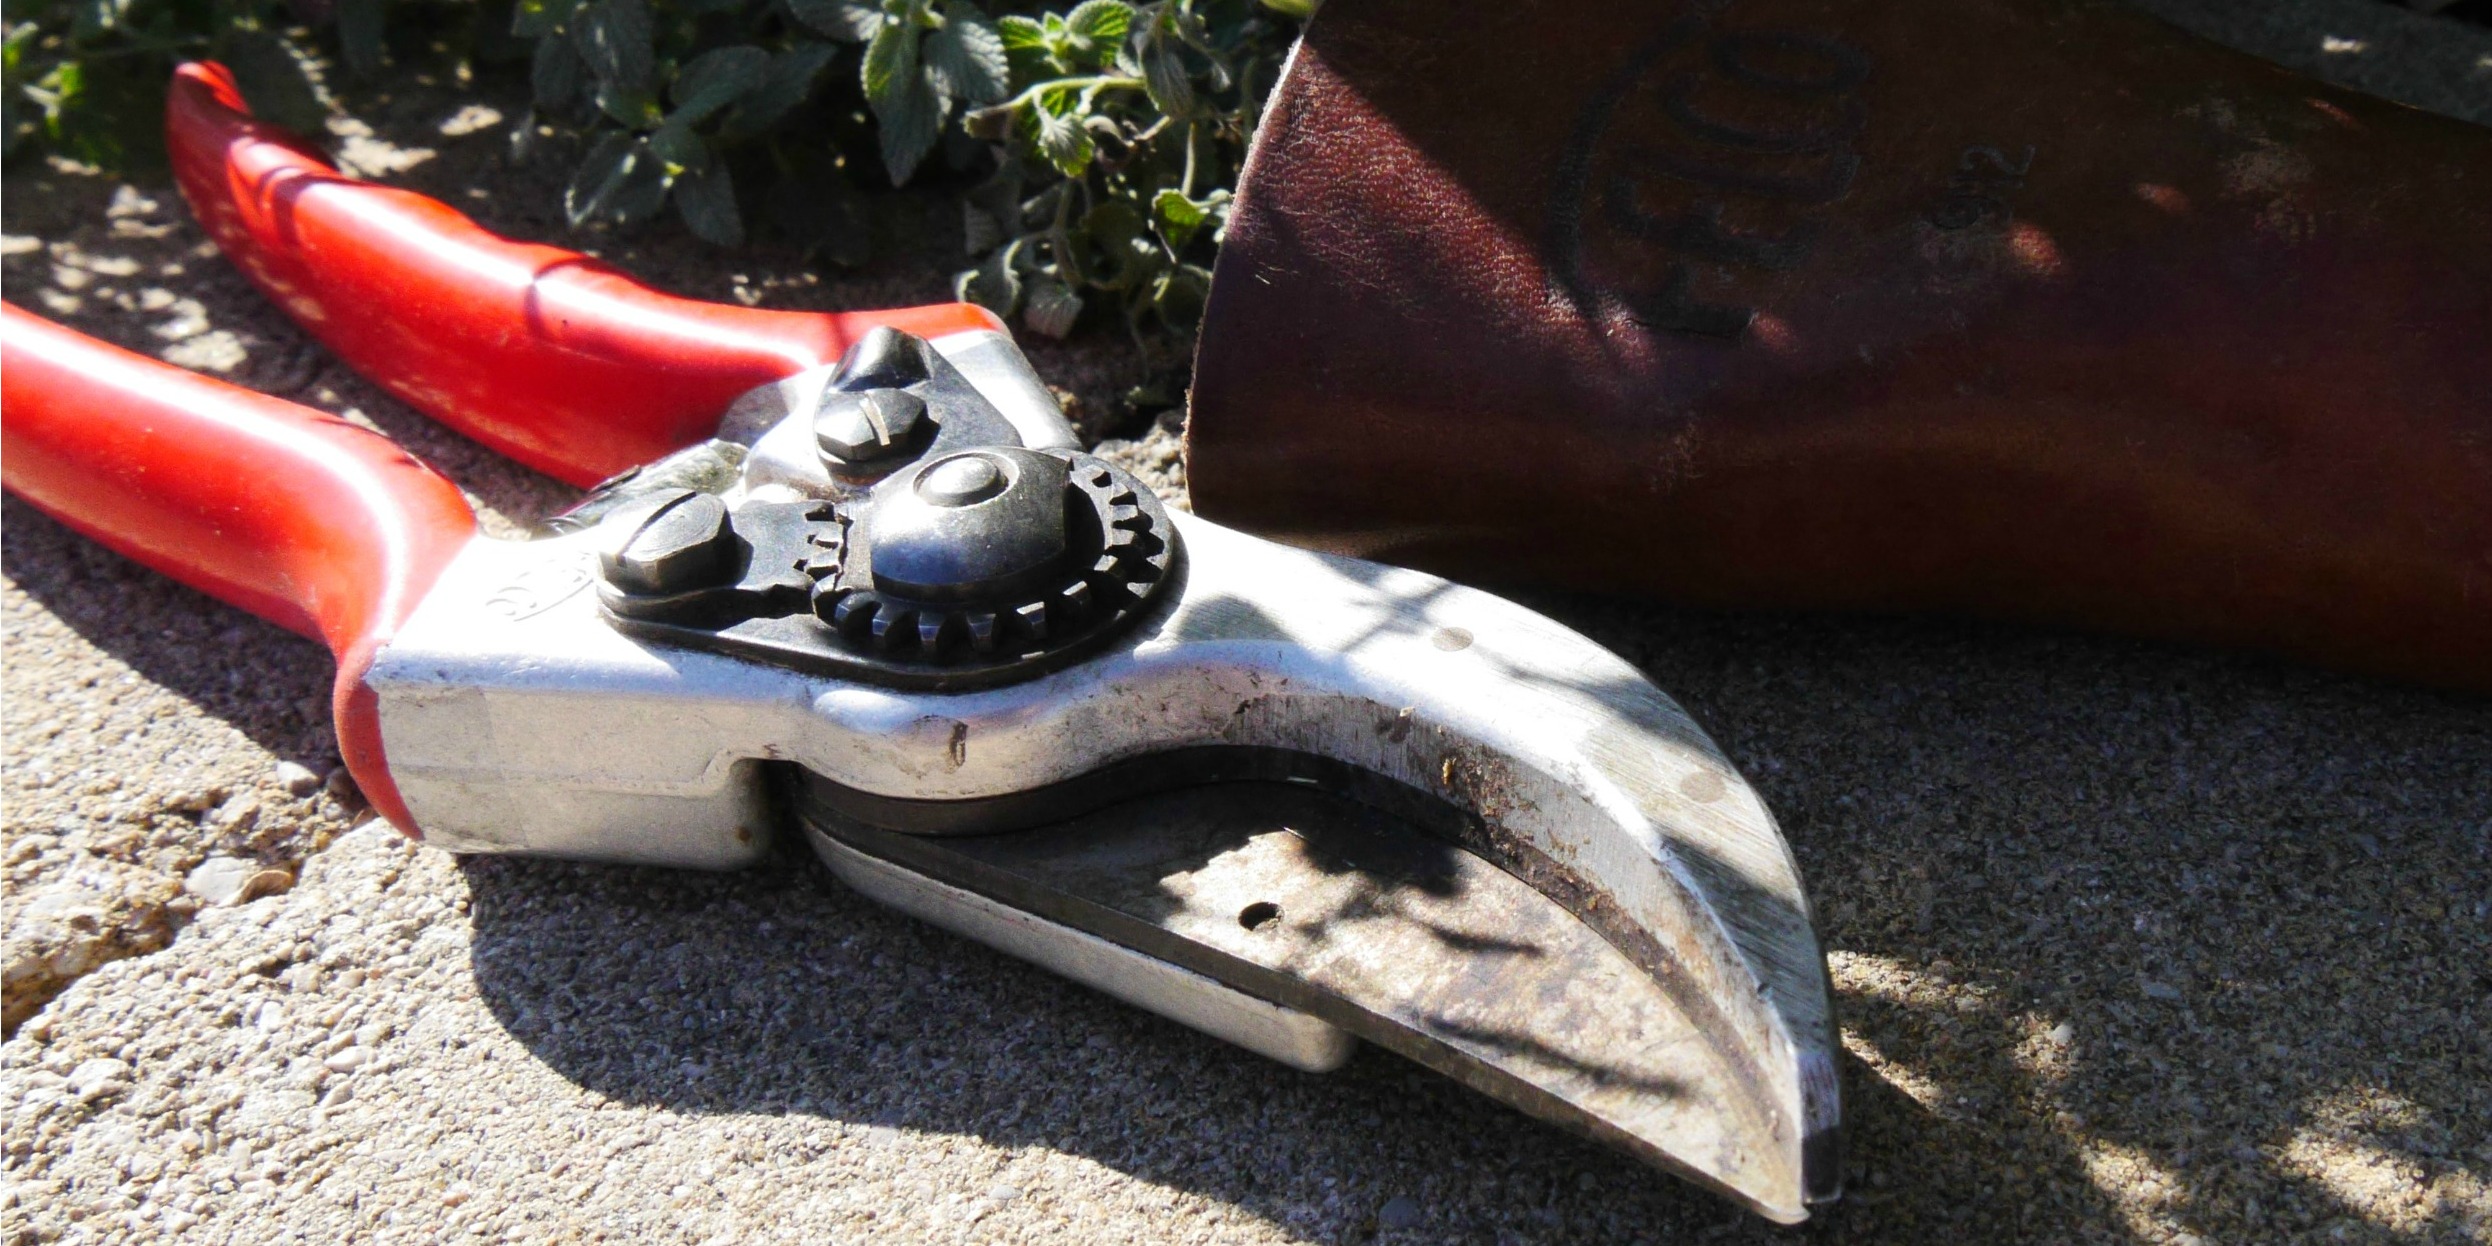 A pair of red-handled pruning shears sit next to a leather case on a stone garden wall.